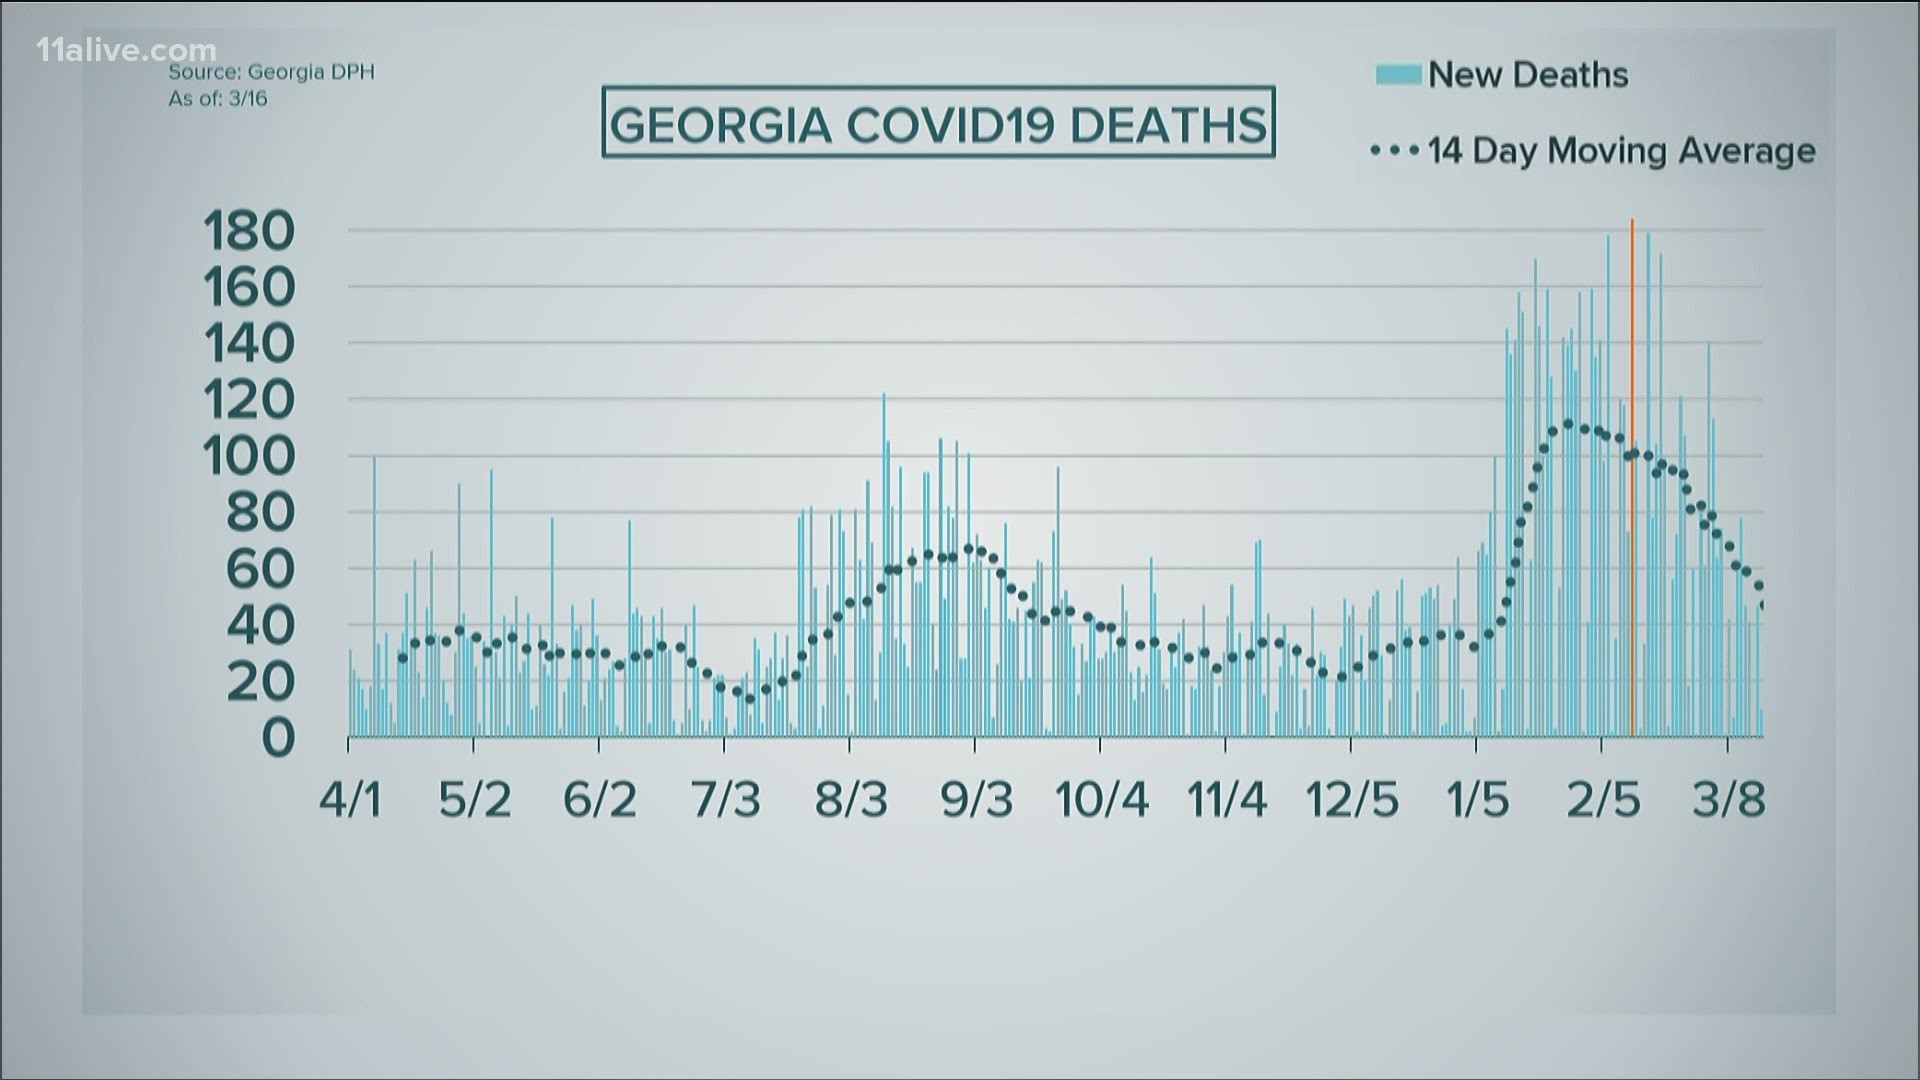 Georgia's COVID numbers showed some slight fluctuations today.